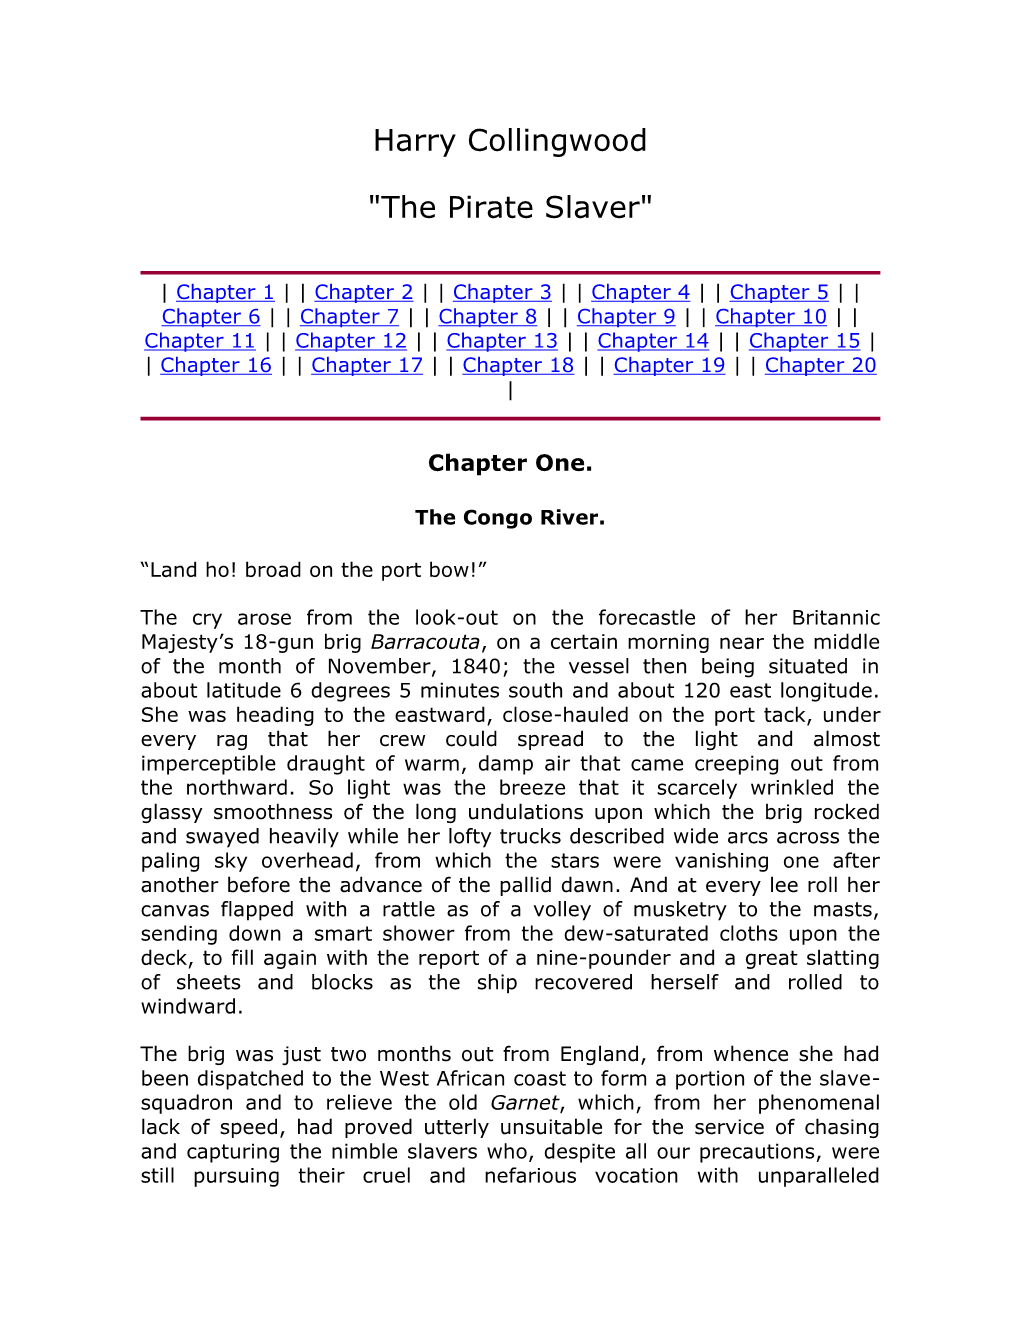 The Pirate Slaver, by Harry Collingwood